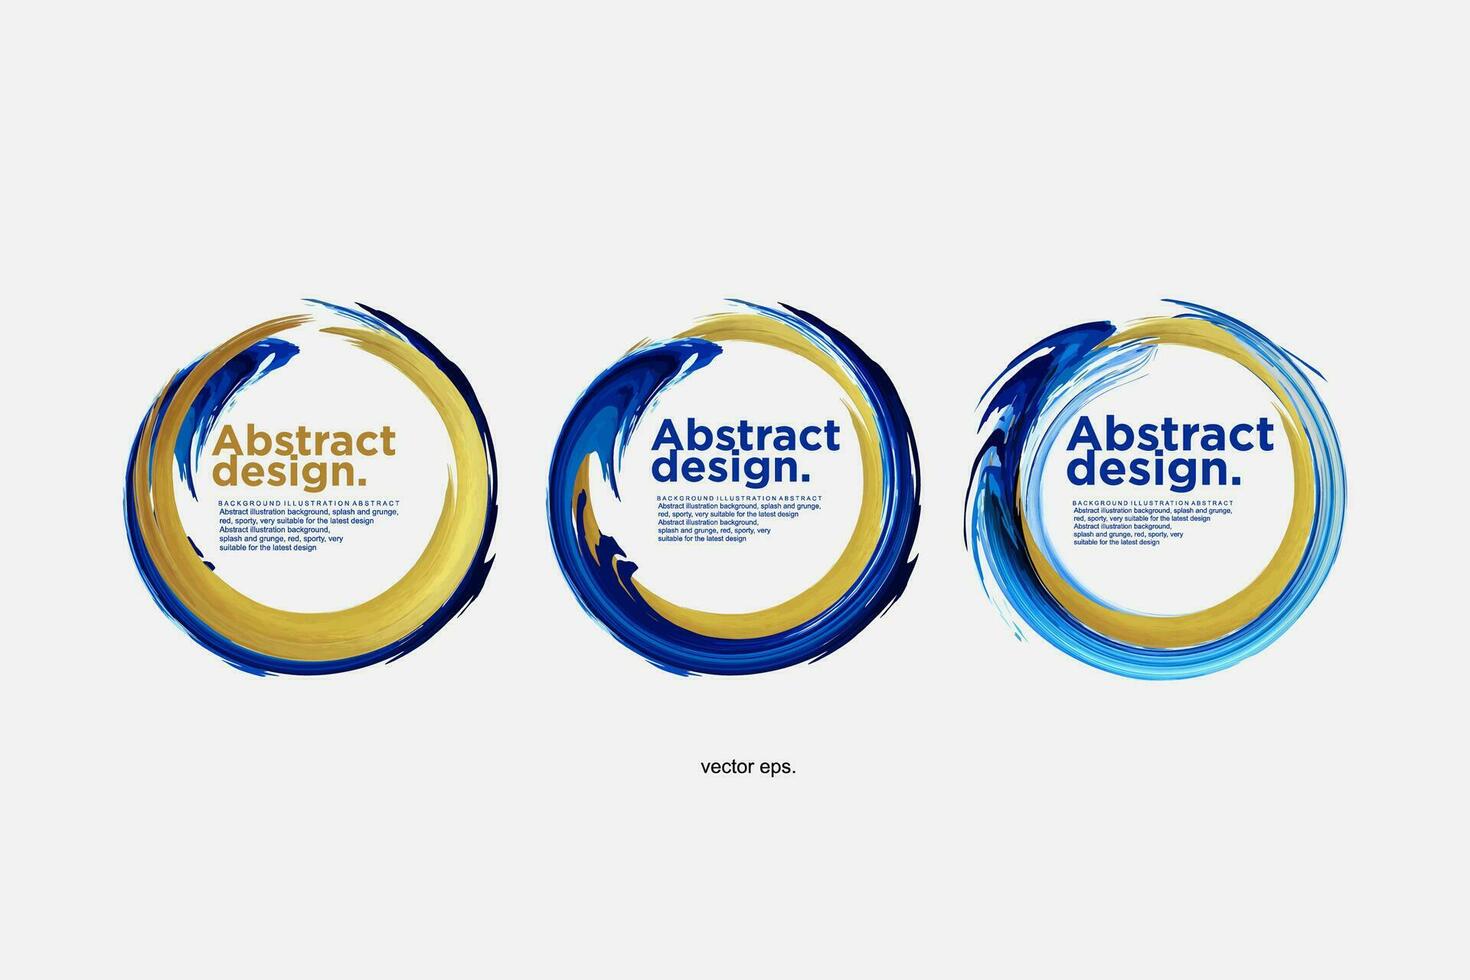 abstract design logo set with blue and gold swirls vector